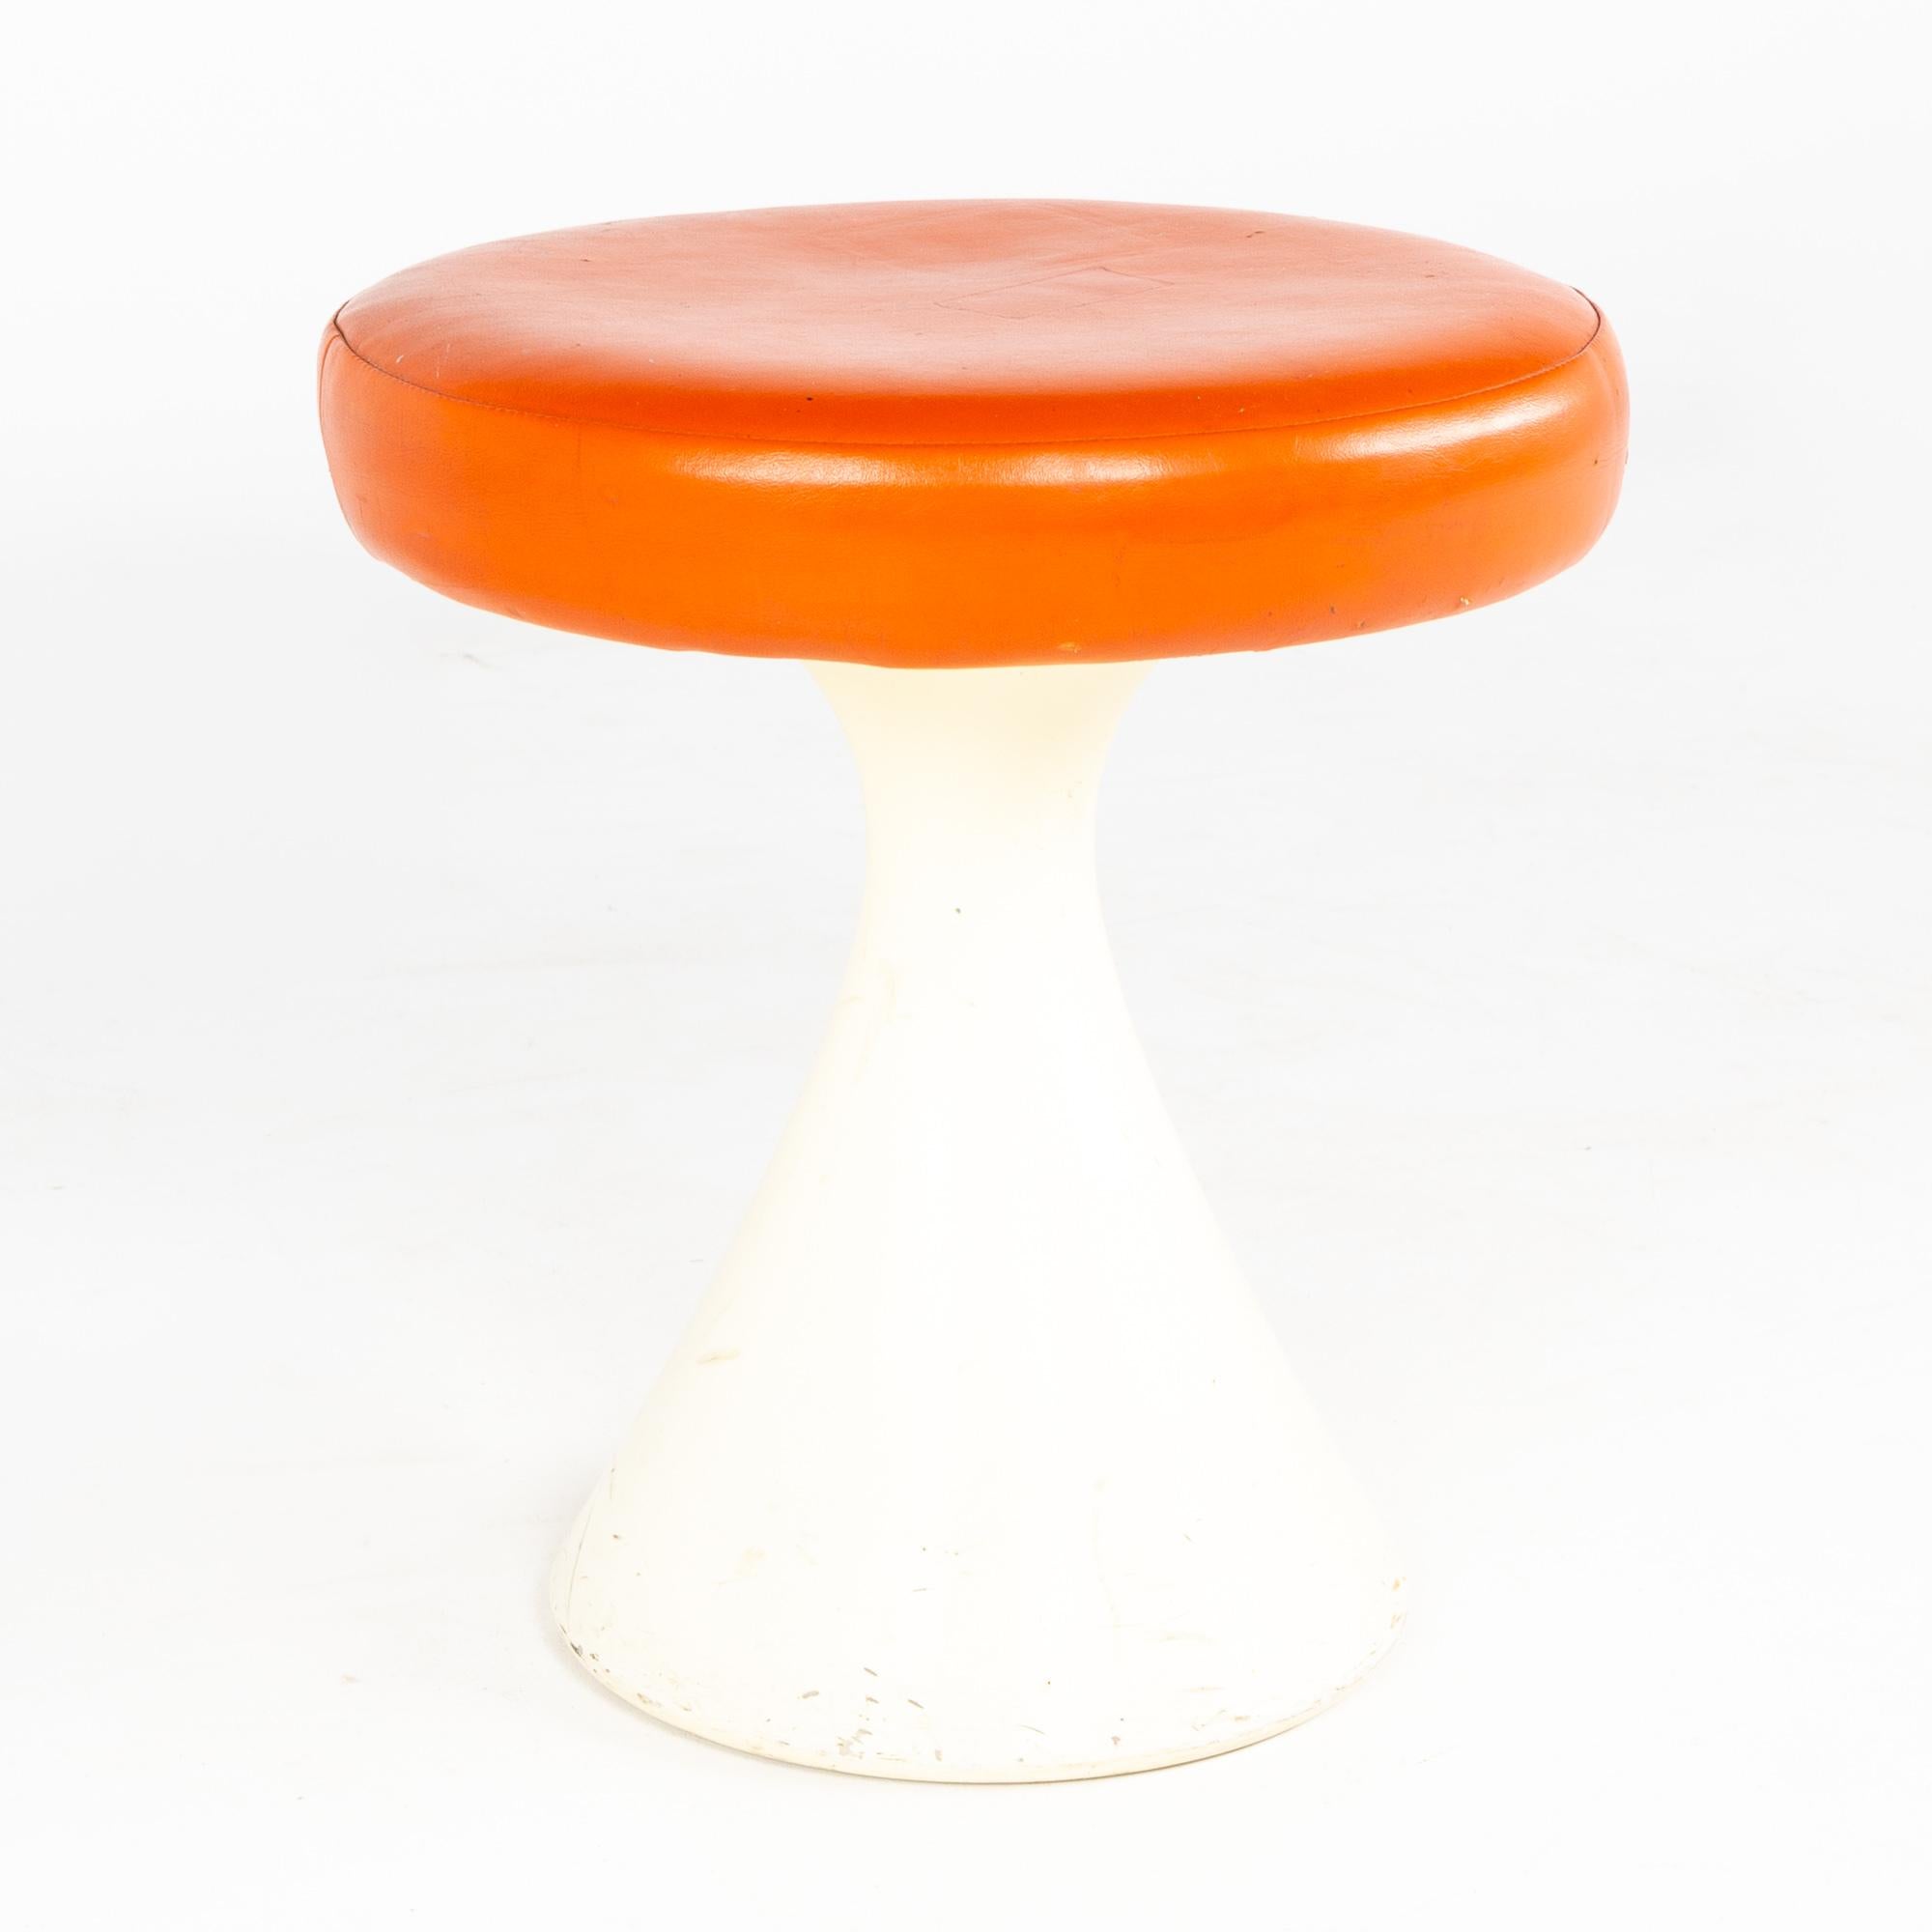 Saarinen Style mid century Tulip stool

This stool measures: 16.5 wide x 16.5 deep x 18 inches high

All pieces of furniture can be had in what we call restored vintage condition. That means the piece is restored upon purchase so it’s free of